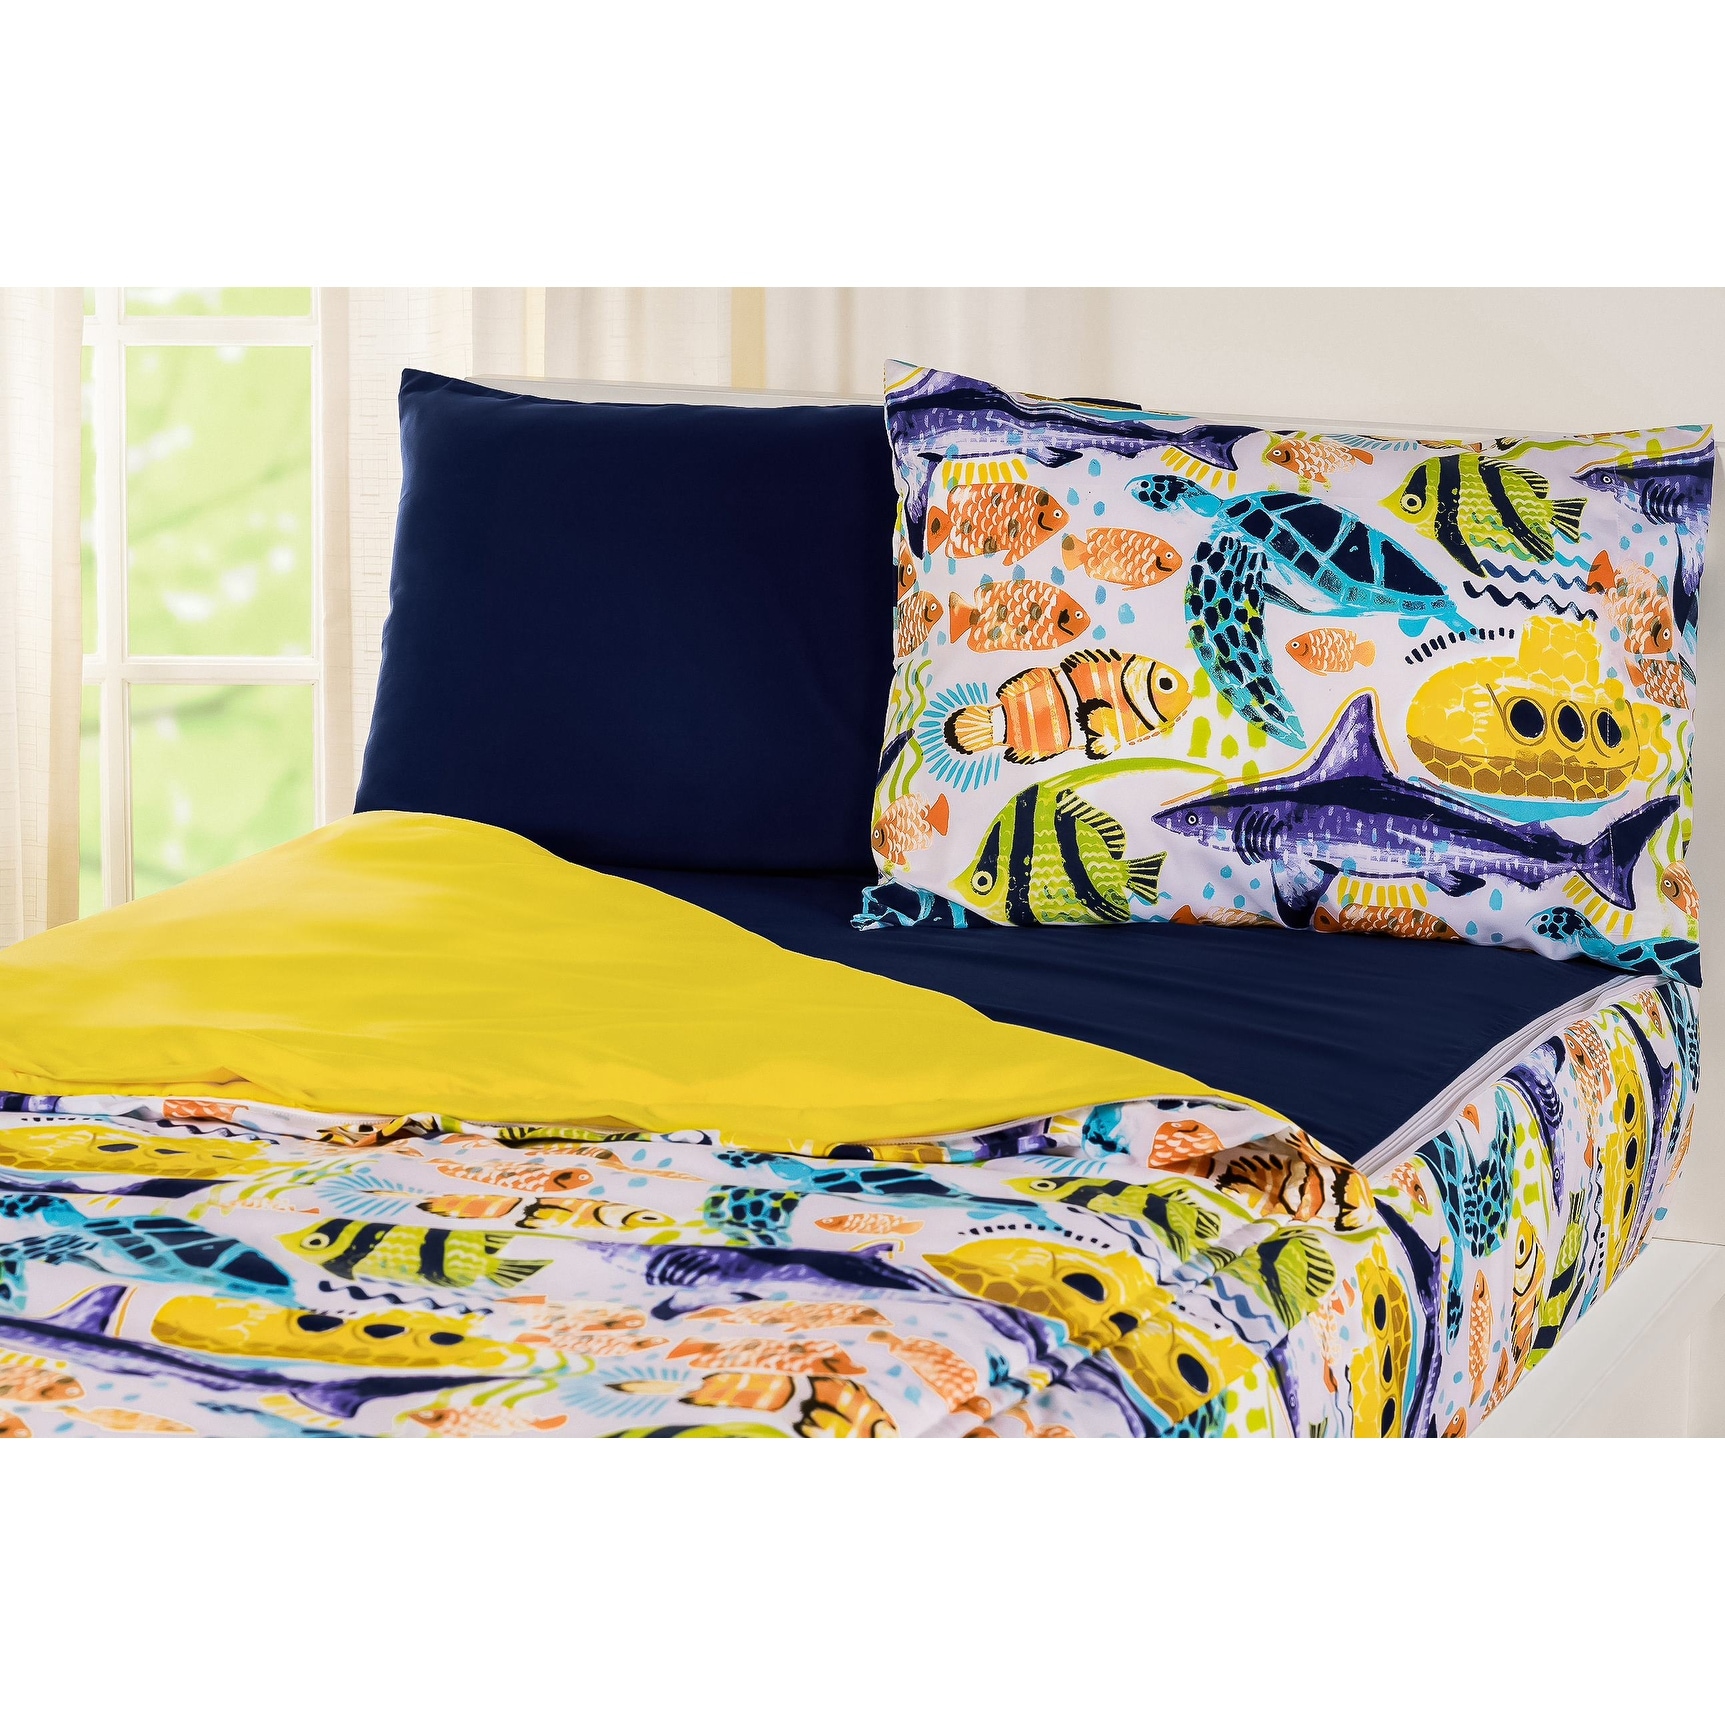 https://ak1.ostkcdn.com/images/products/is/images/direct/c33df139a3fedb5a25d7674f6cfd743dc86dba78/Siscovers-Beneath-The-Waves-Bunkie-Deluxe-Zipper-Bedding-Set.jpg